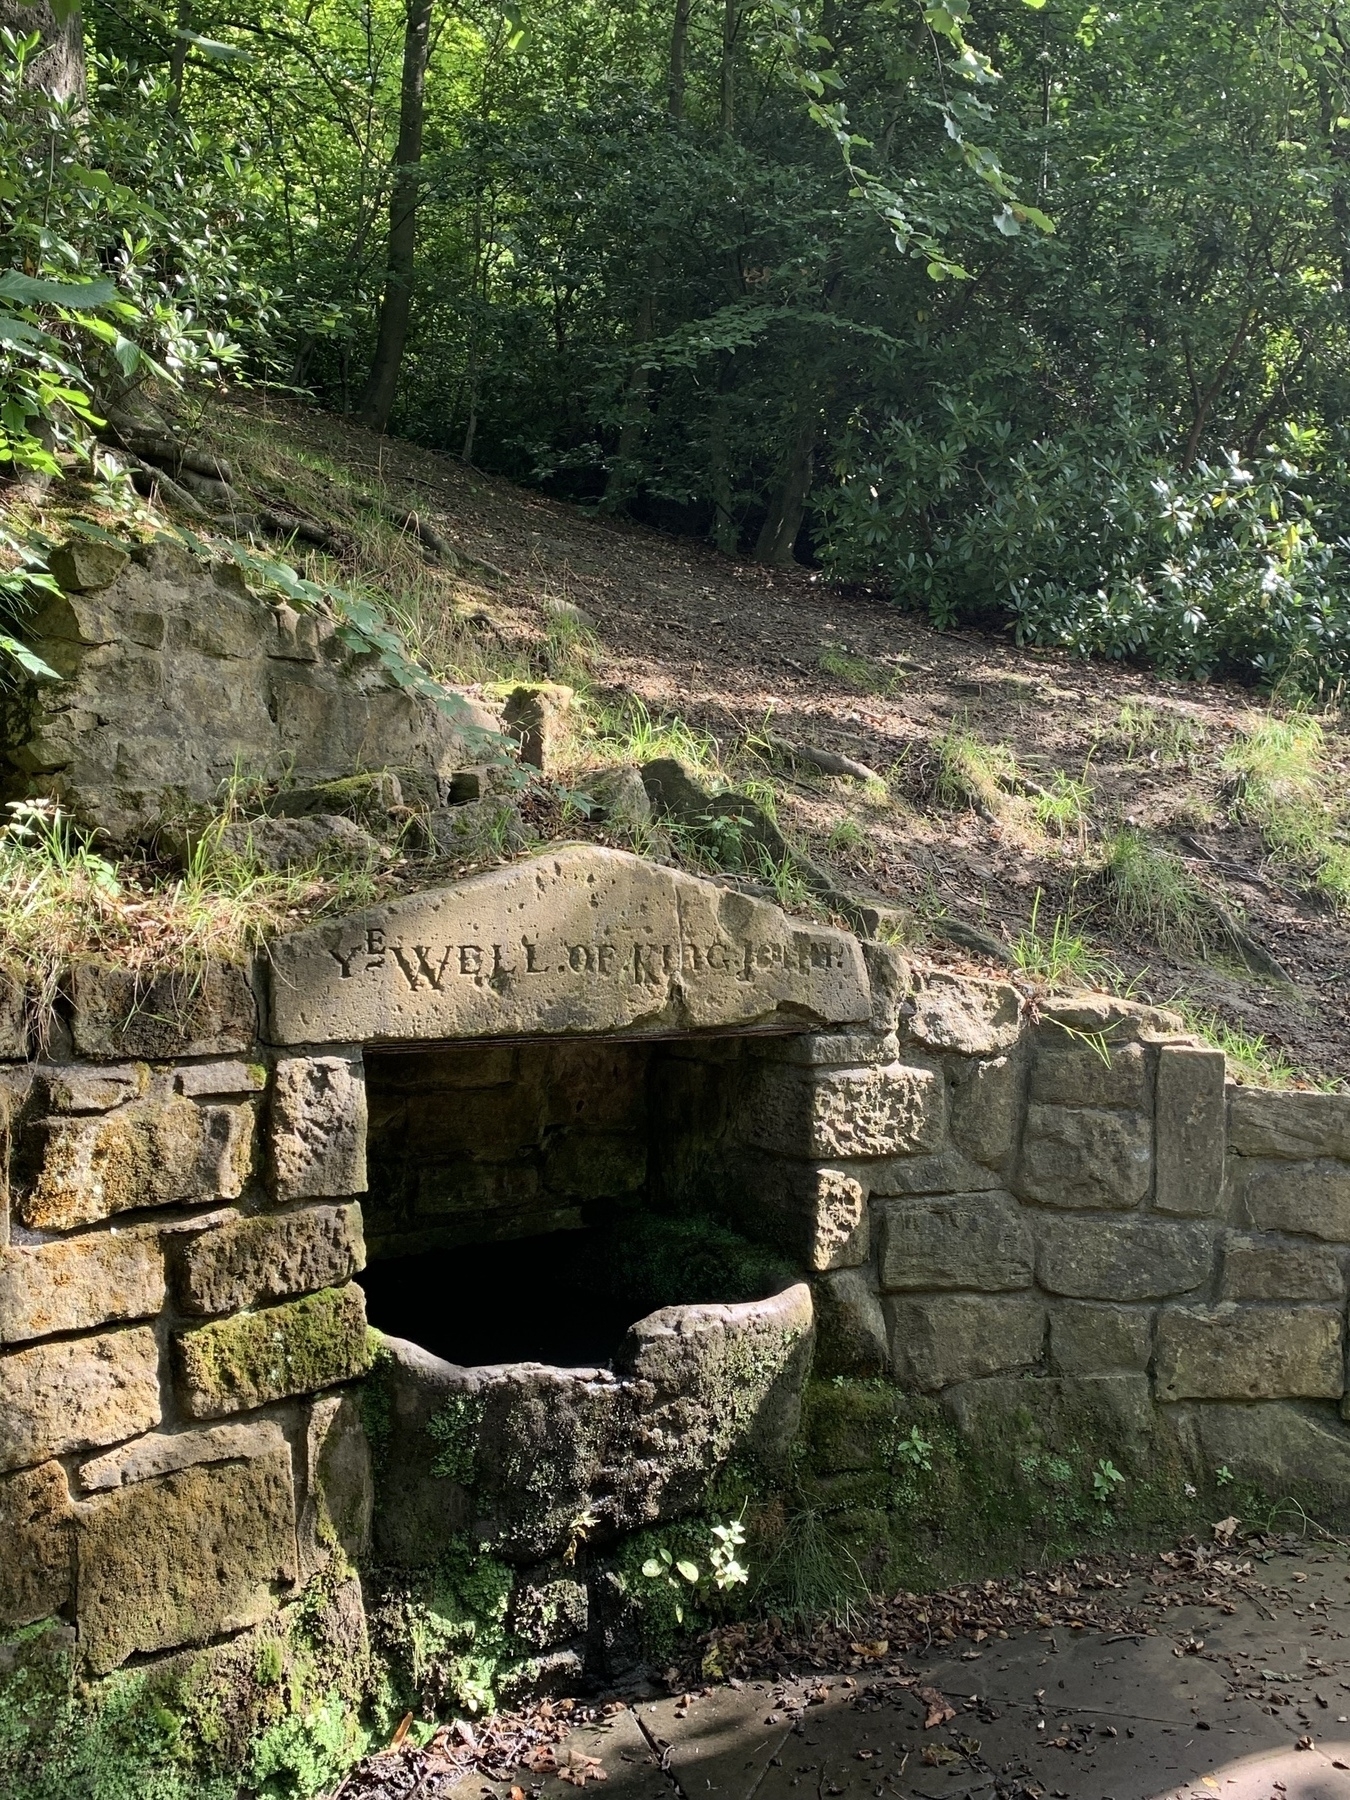 Stone well built into a mud bank under cover of trees. Carved inscription reads ‘Ye well of King John’.